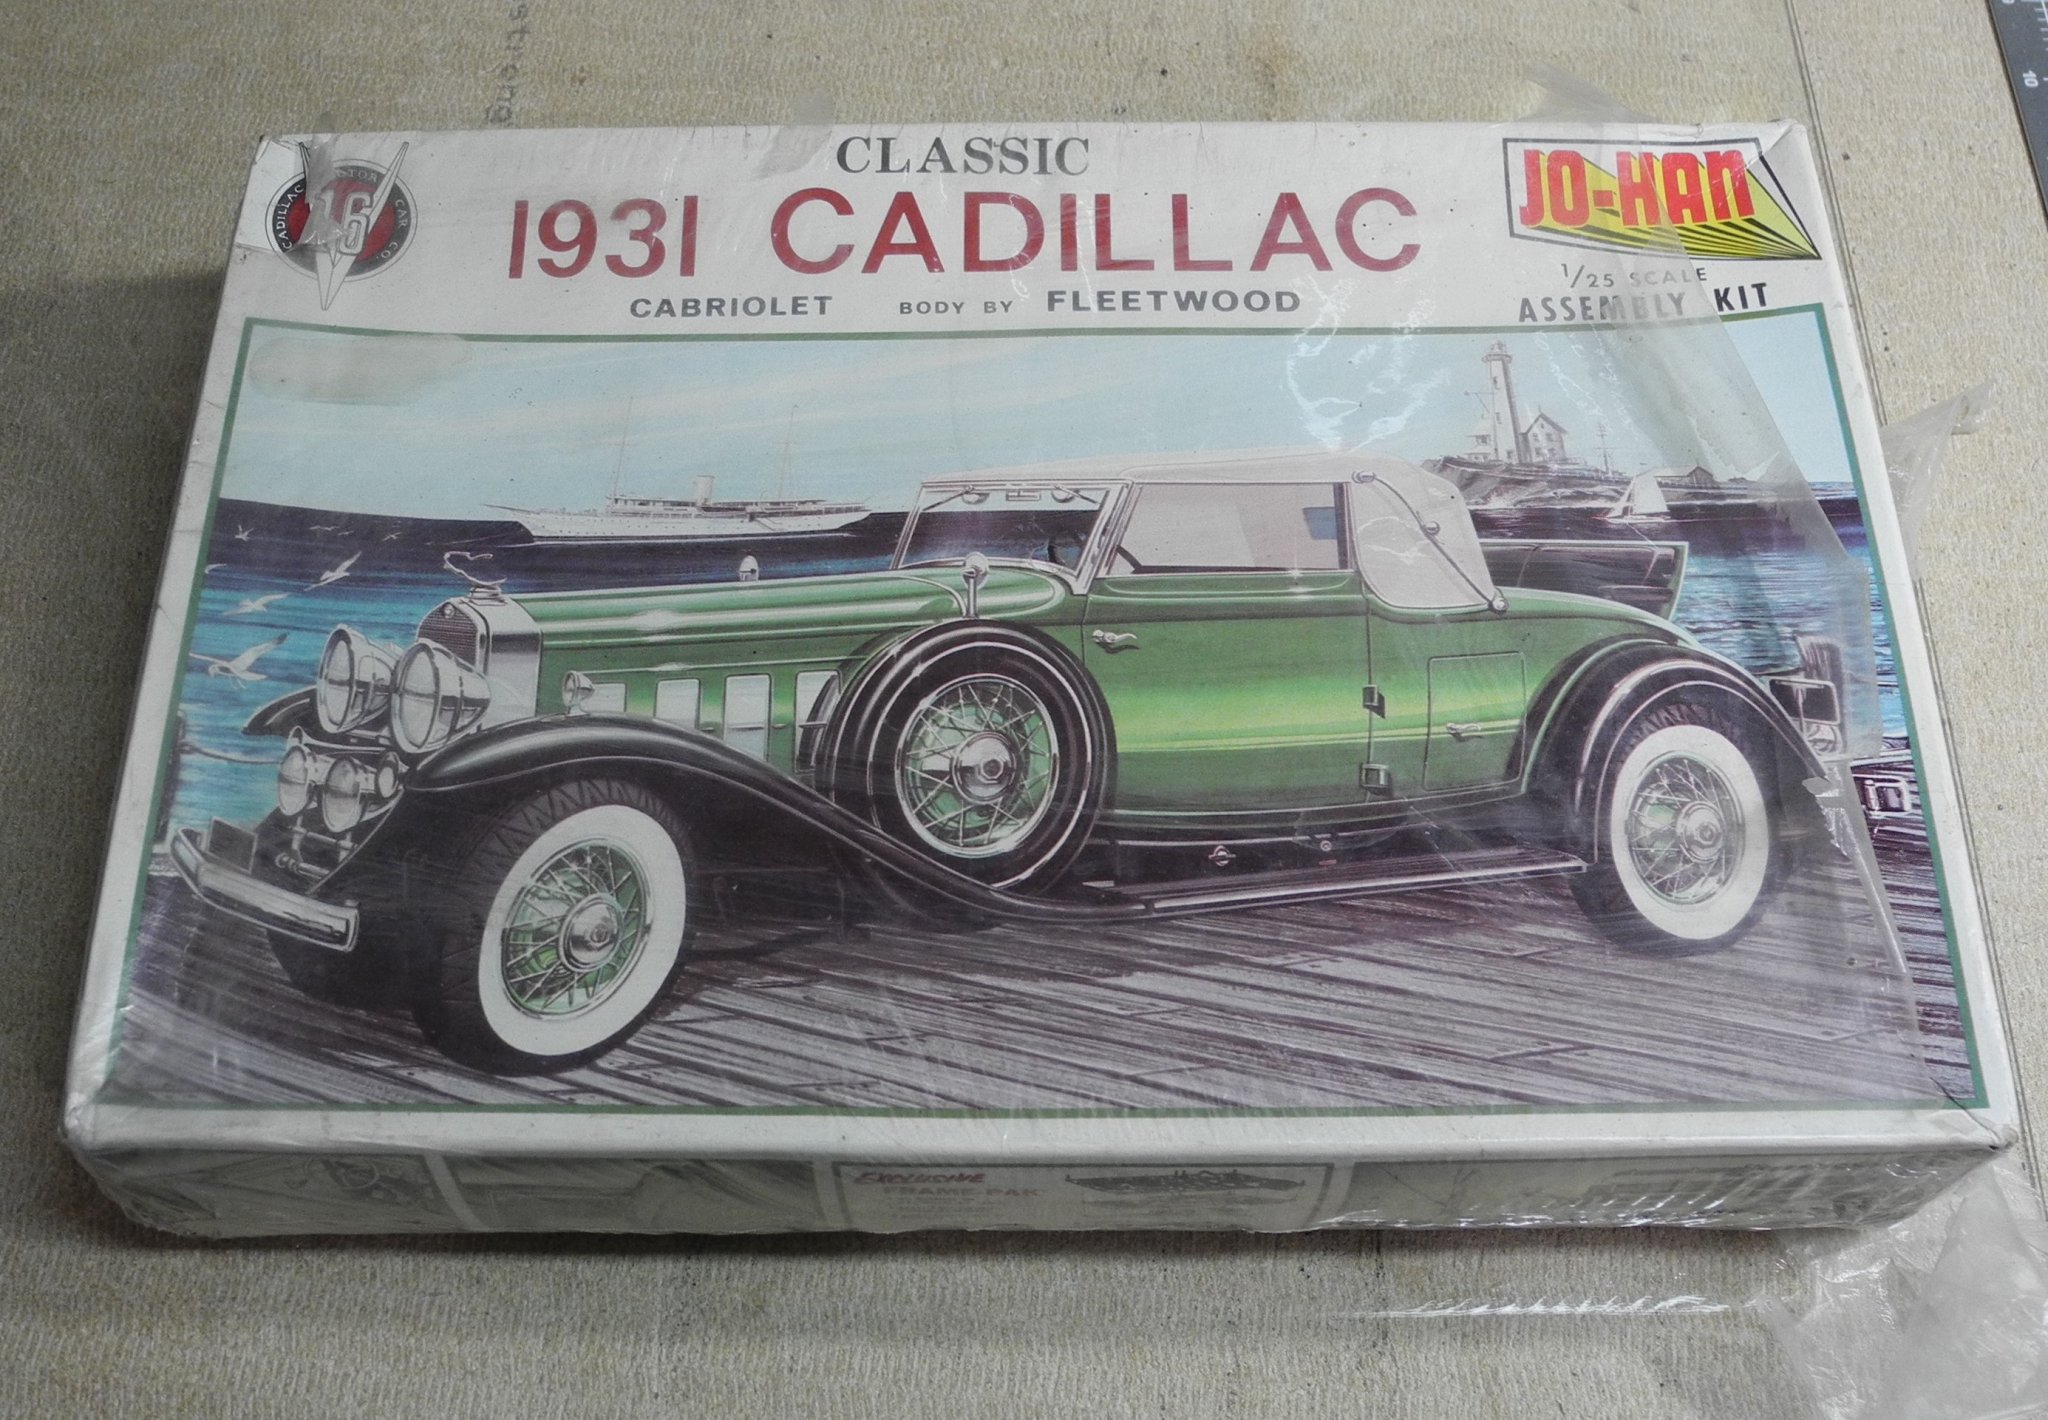 Finished - 1931 Cadillac by CDW - JoHan - 1:25 Scale - Non-ship/categorised  builds - Model Ship World™